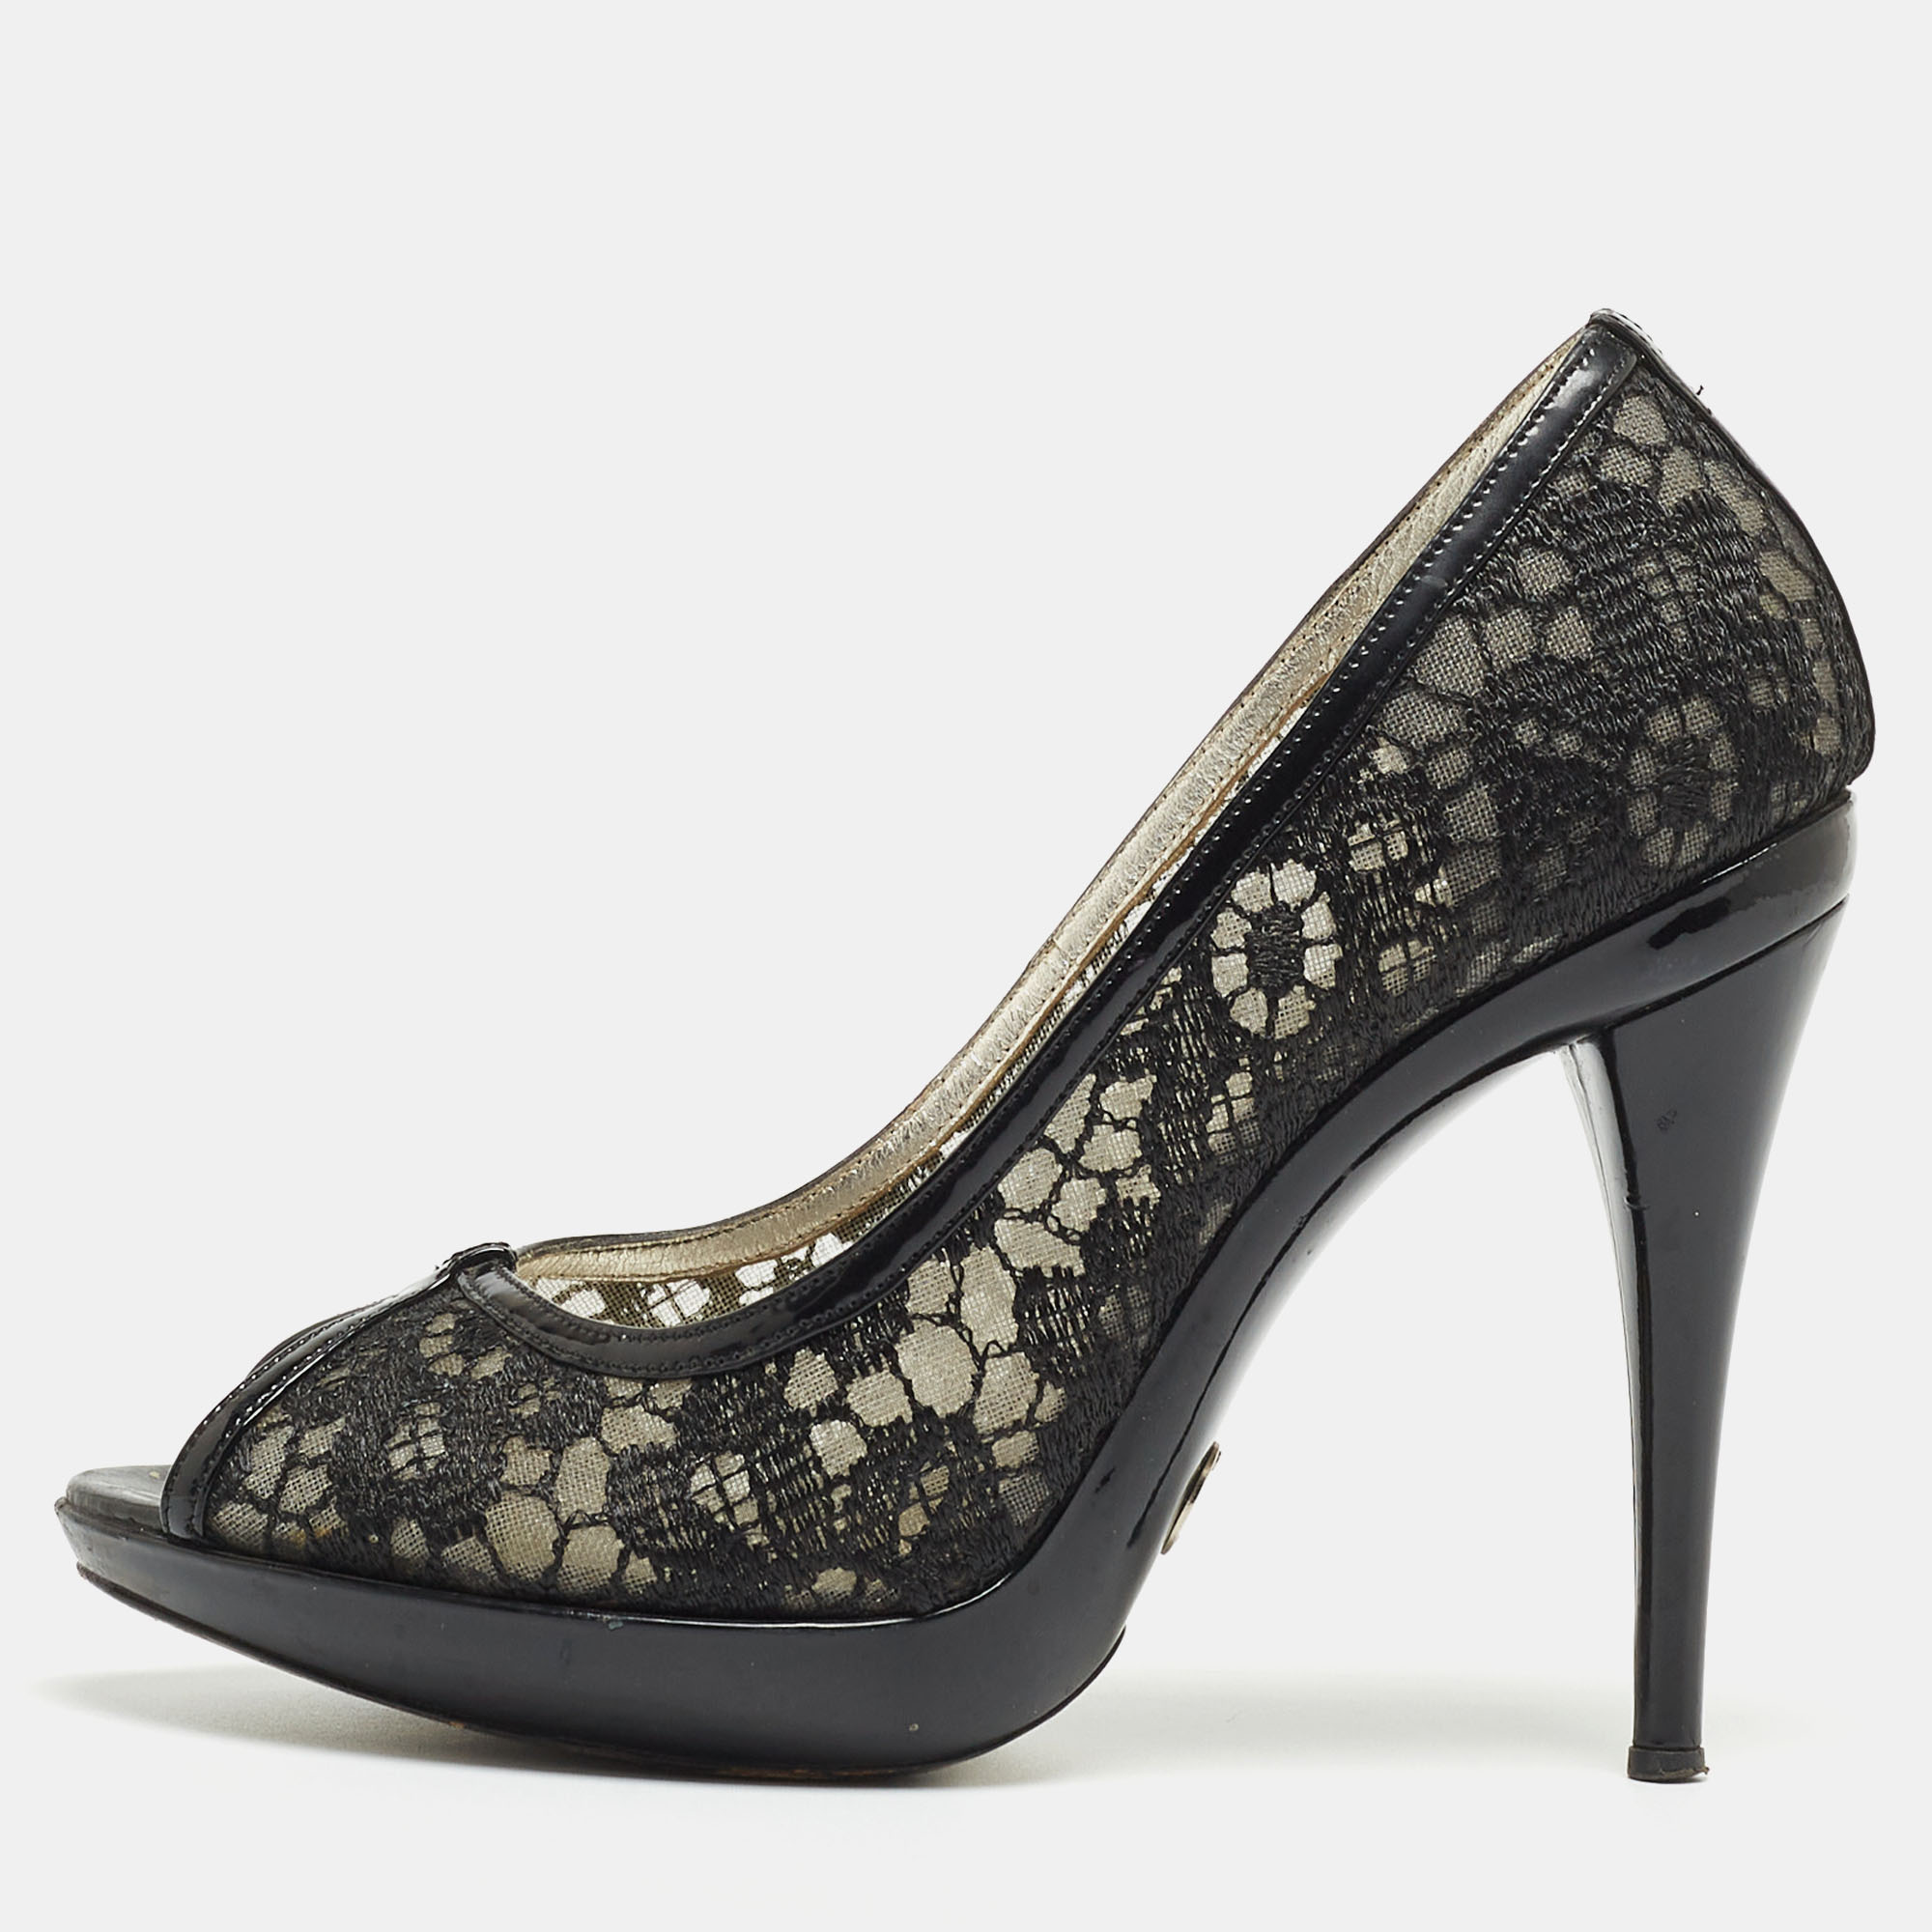 Dolce & Gabbana Black Lace And Patent Leather Open Toe Pumps Size 38.5